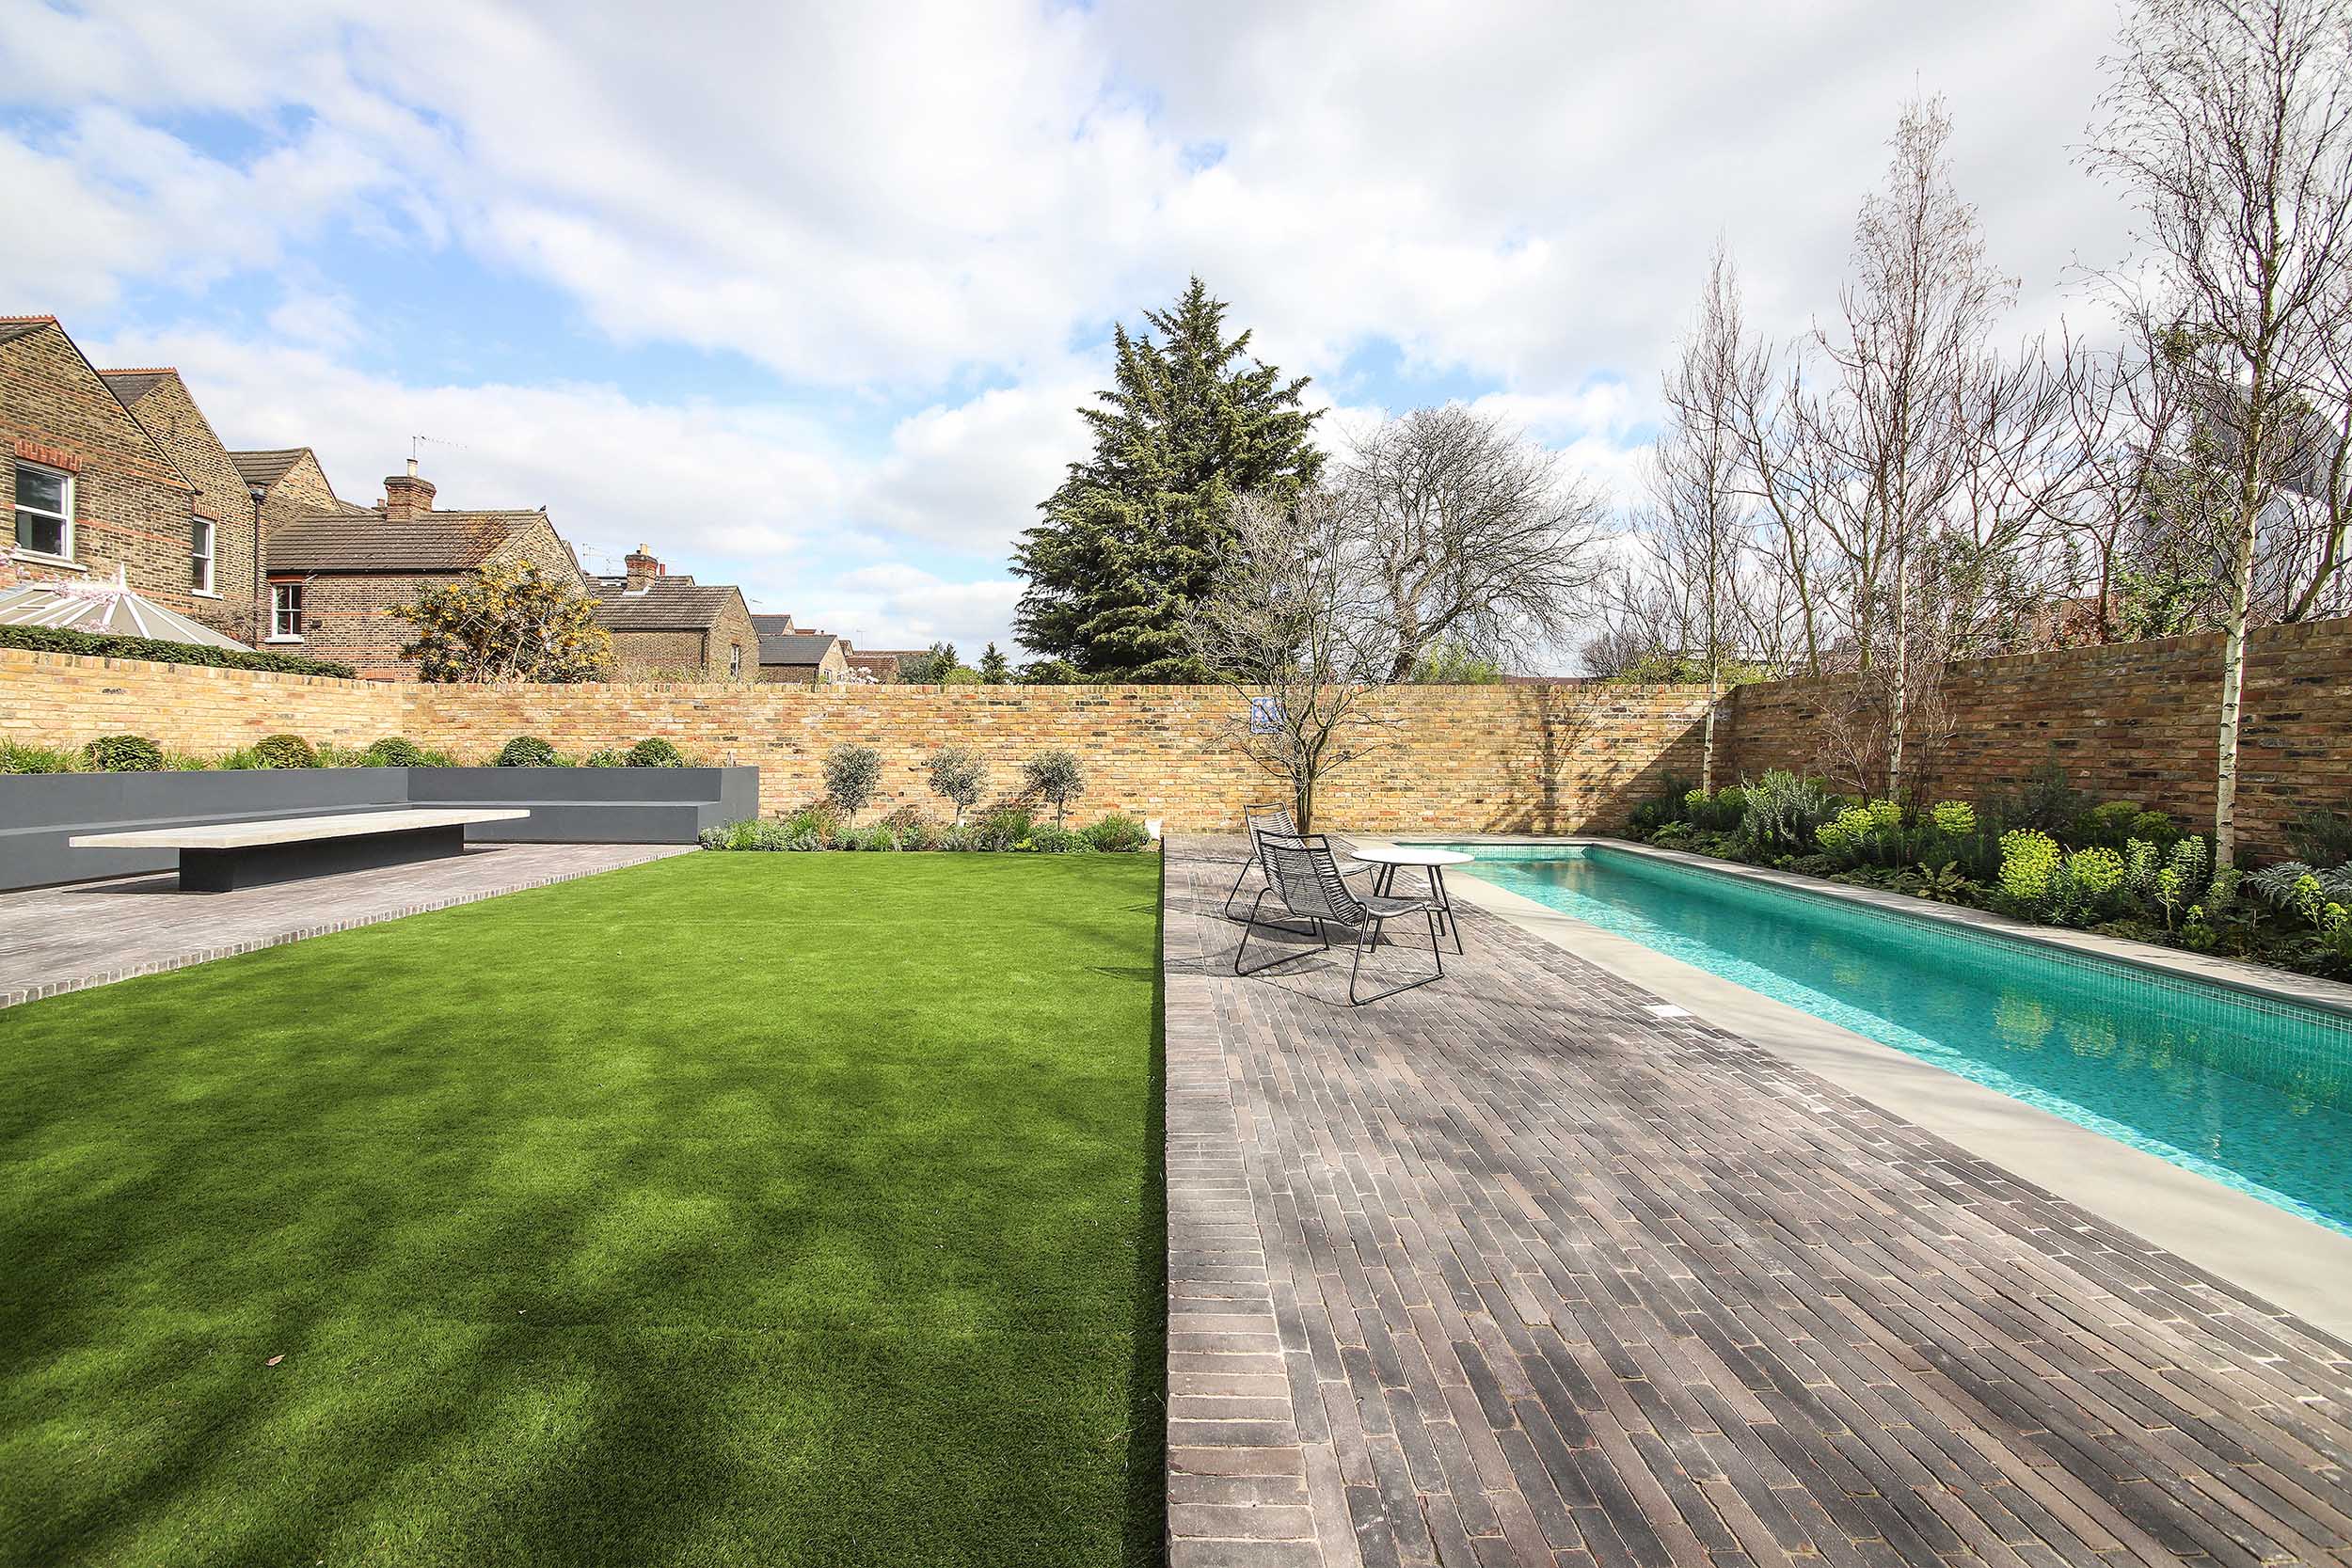 </p> <p>Find your ideal home design pro on designfor-me.com - get matched and see who's interested in your home project. Click image to see more inspiration from our design pros</p> <p>Design by Alexandra, garden designer from Camden, London</p> <p> #gardendesign #gardeninspiration #gardenlove #gardenideas #gardens </p> <p>